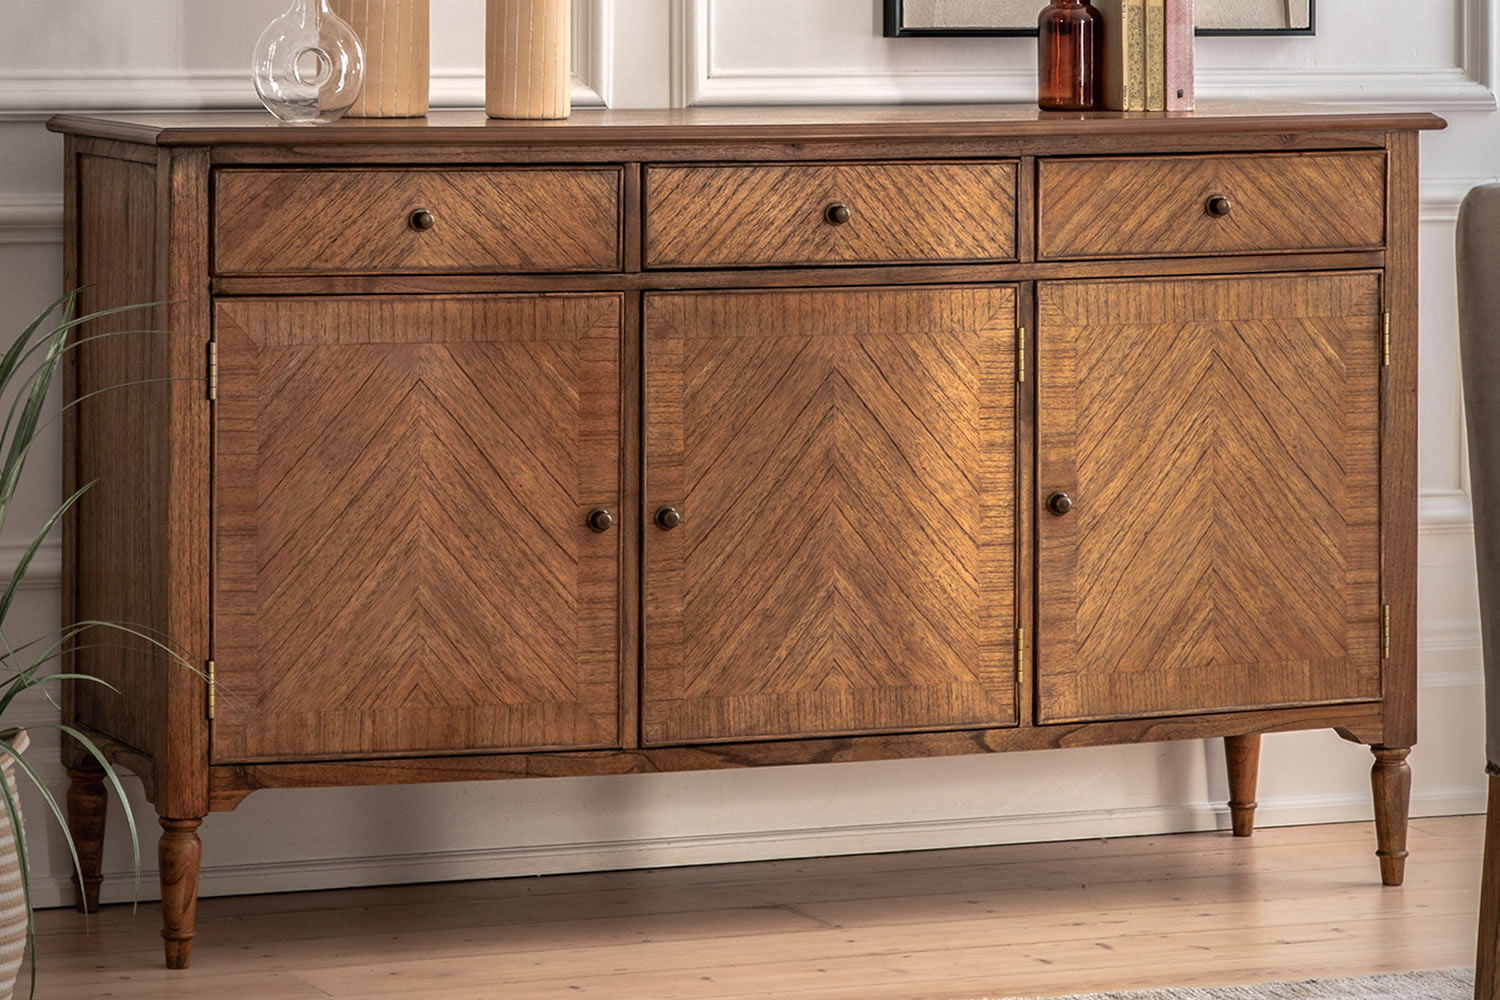 View Highgrove Large Mid Brown Wooden Living Room Sideboard 3Door 3Drawer Cupboard Cabinet Crafted From Mindi Wood With Marquetry Mindi Veneer information